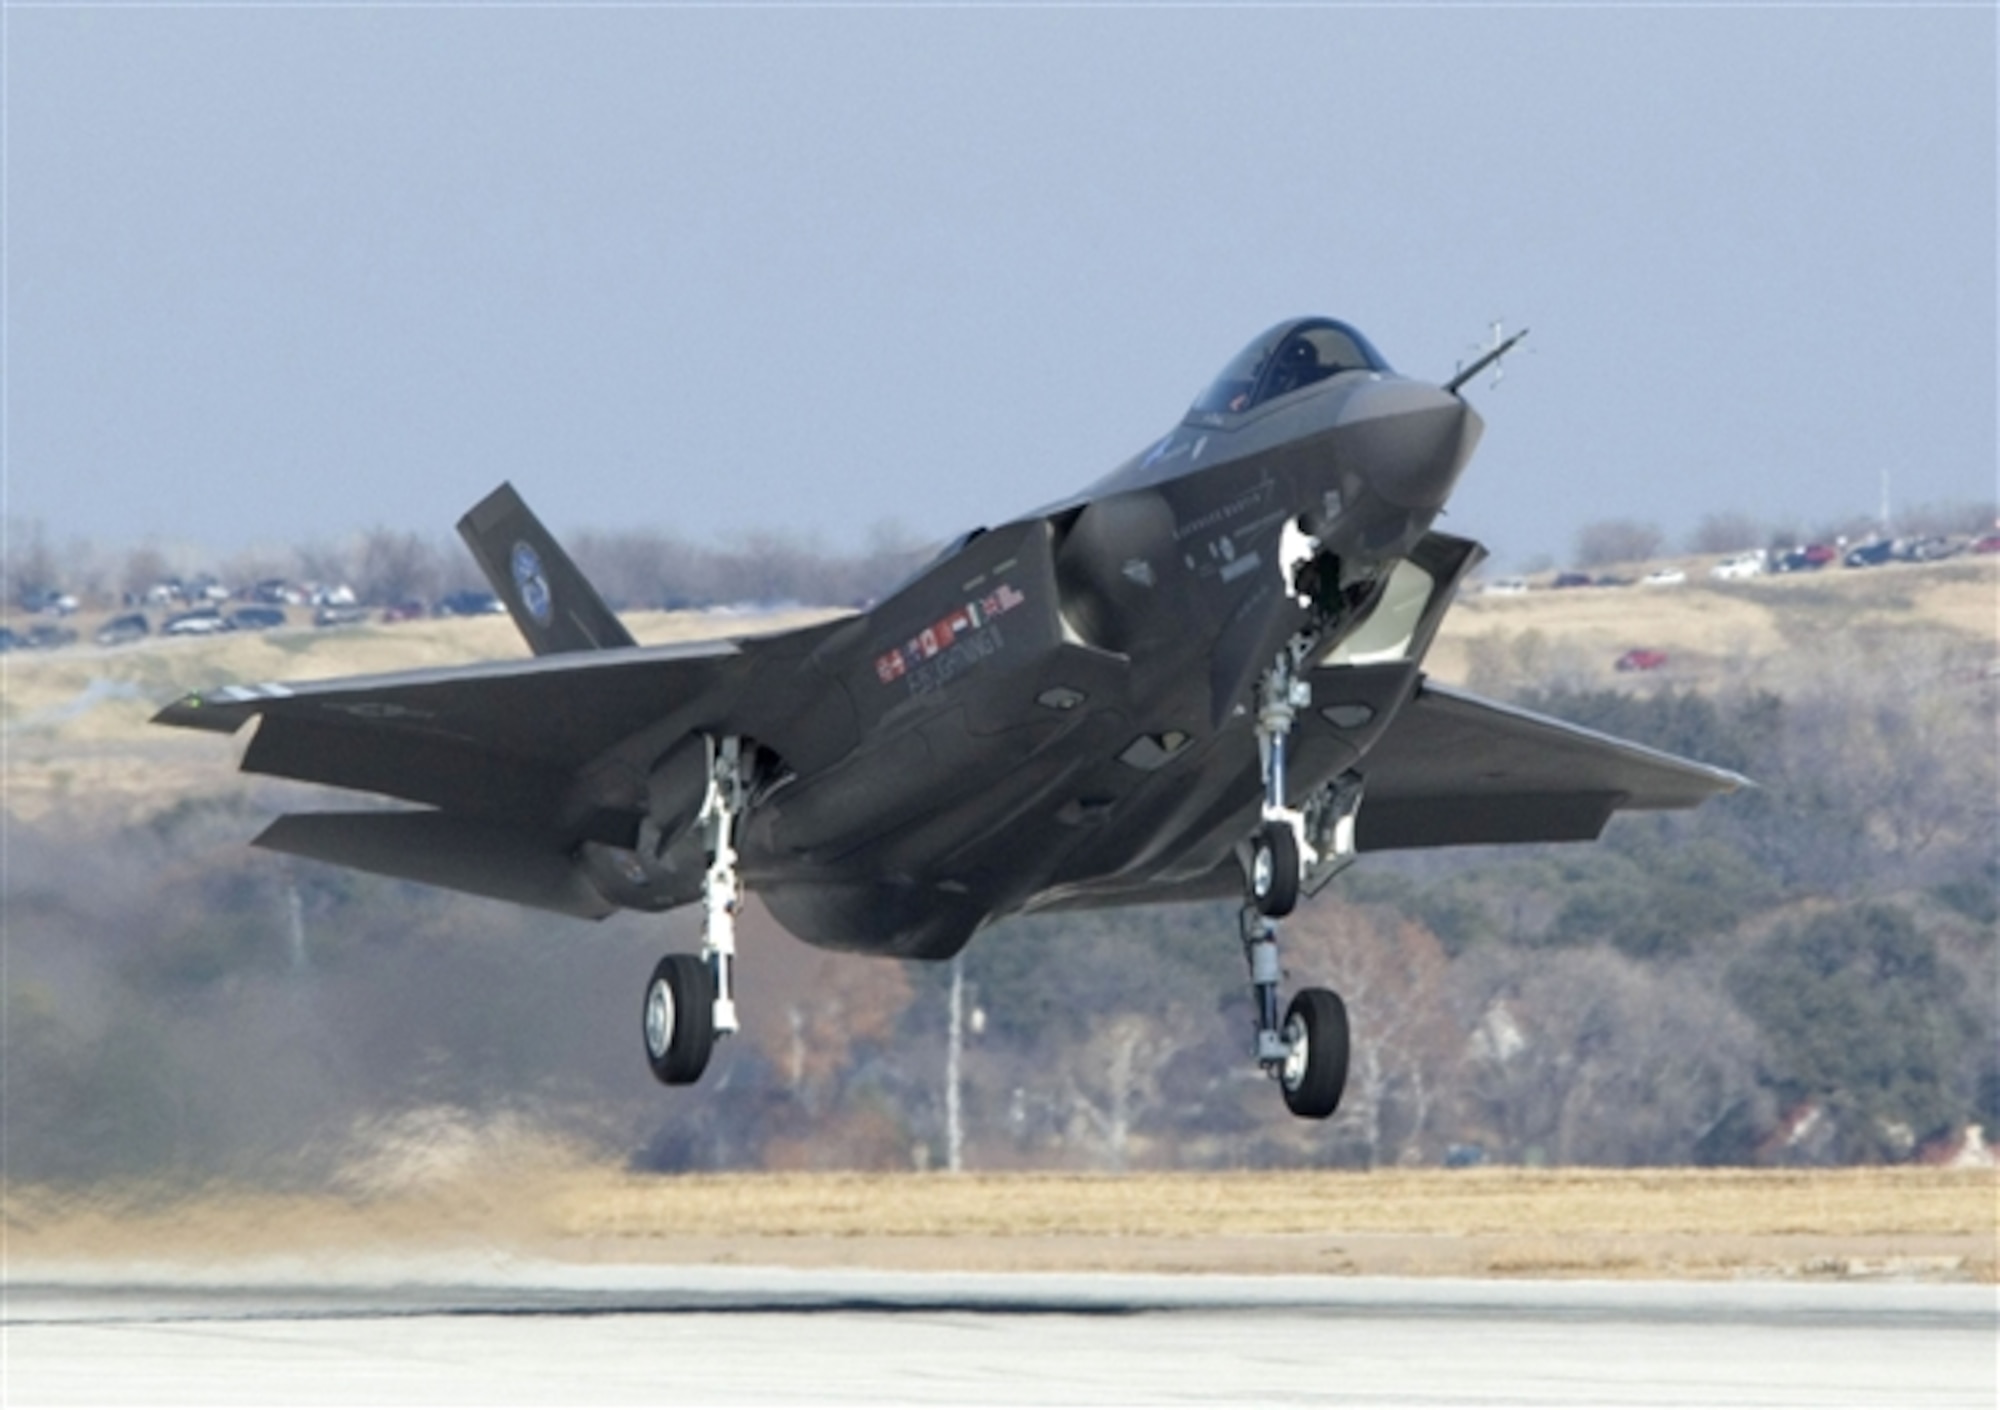 An F-35 Lightning II joint strike fighter takes off from a Lockheed Martin facility in Fort Worth, Texas, for an initial flight as part of system development testing. (Courtesy photo)